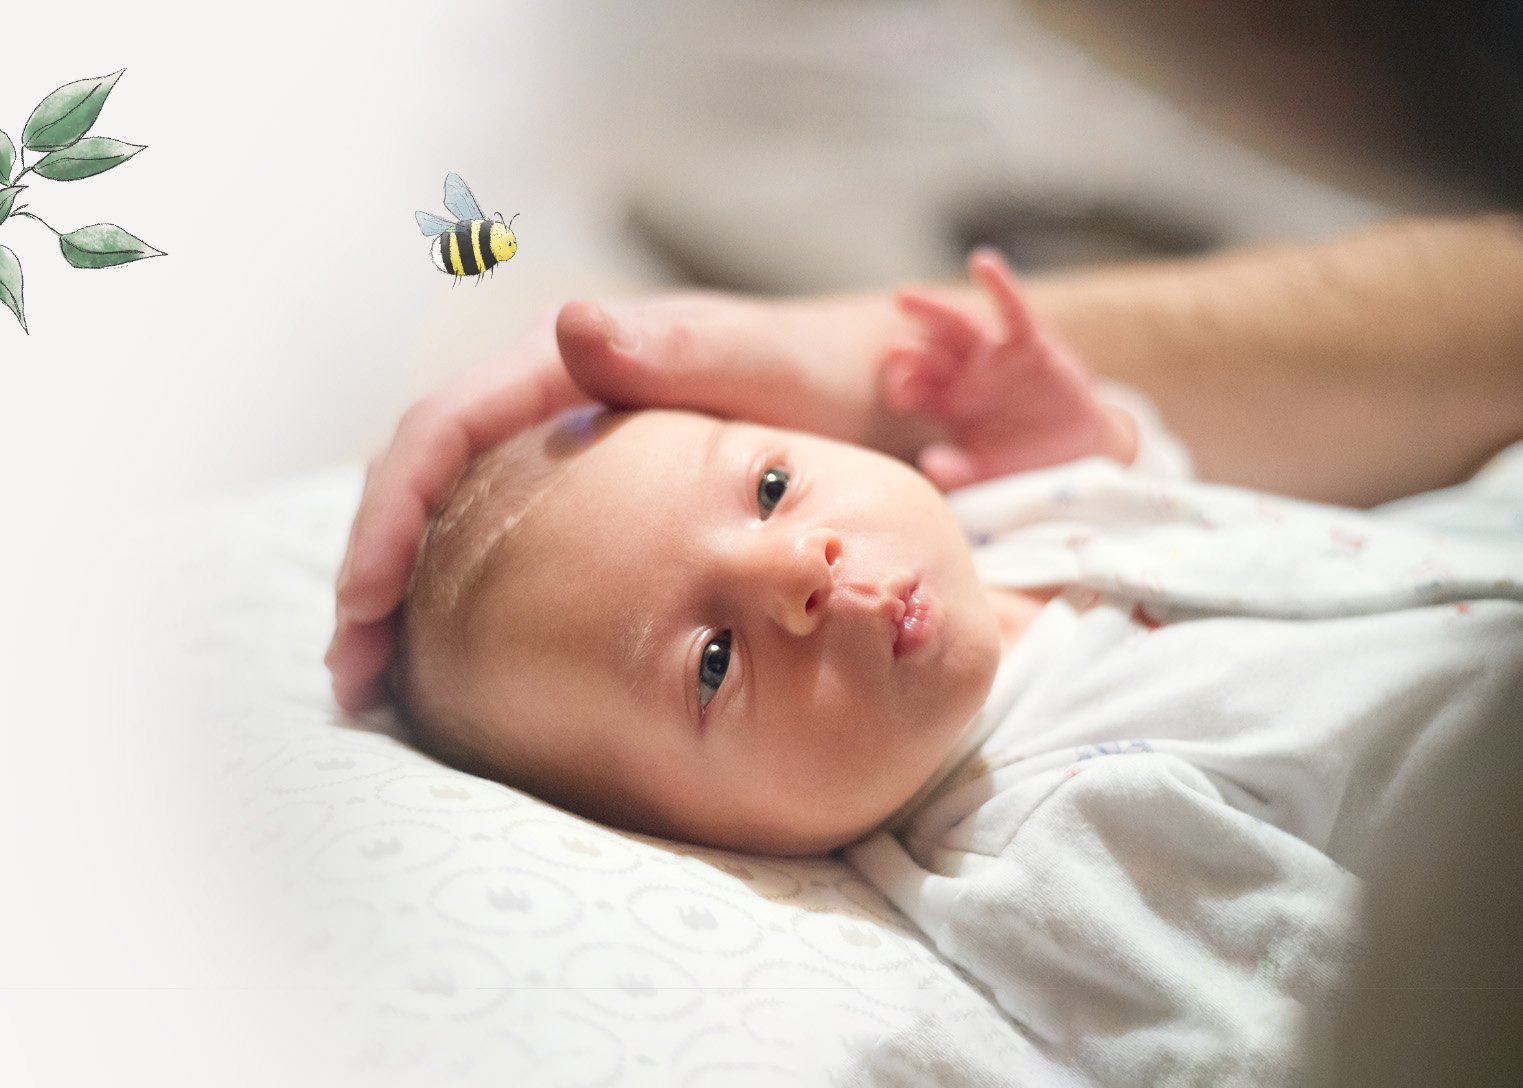 Baby skin - why less is more when it comes to baby care?